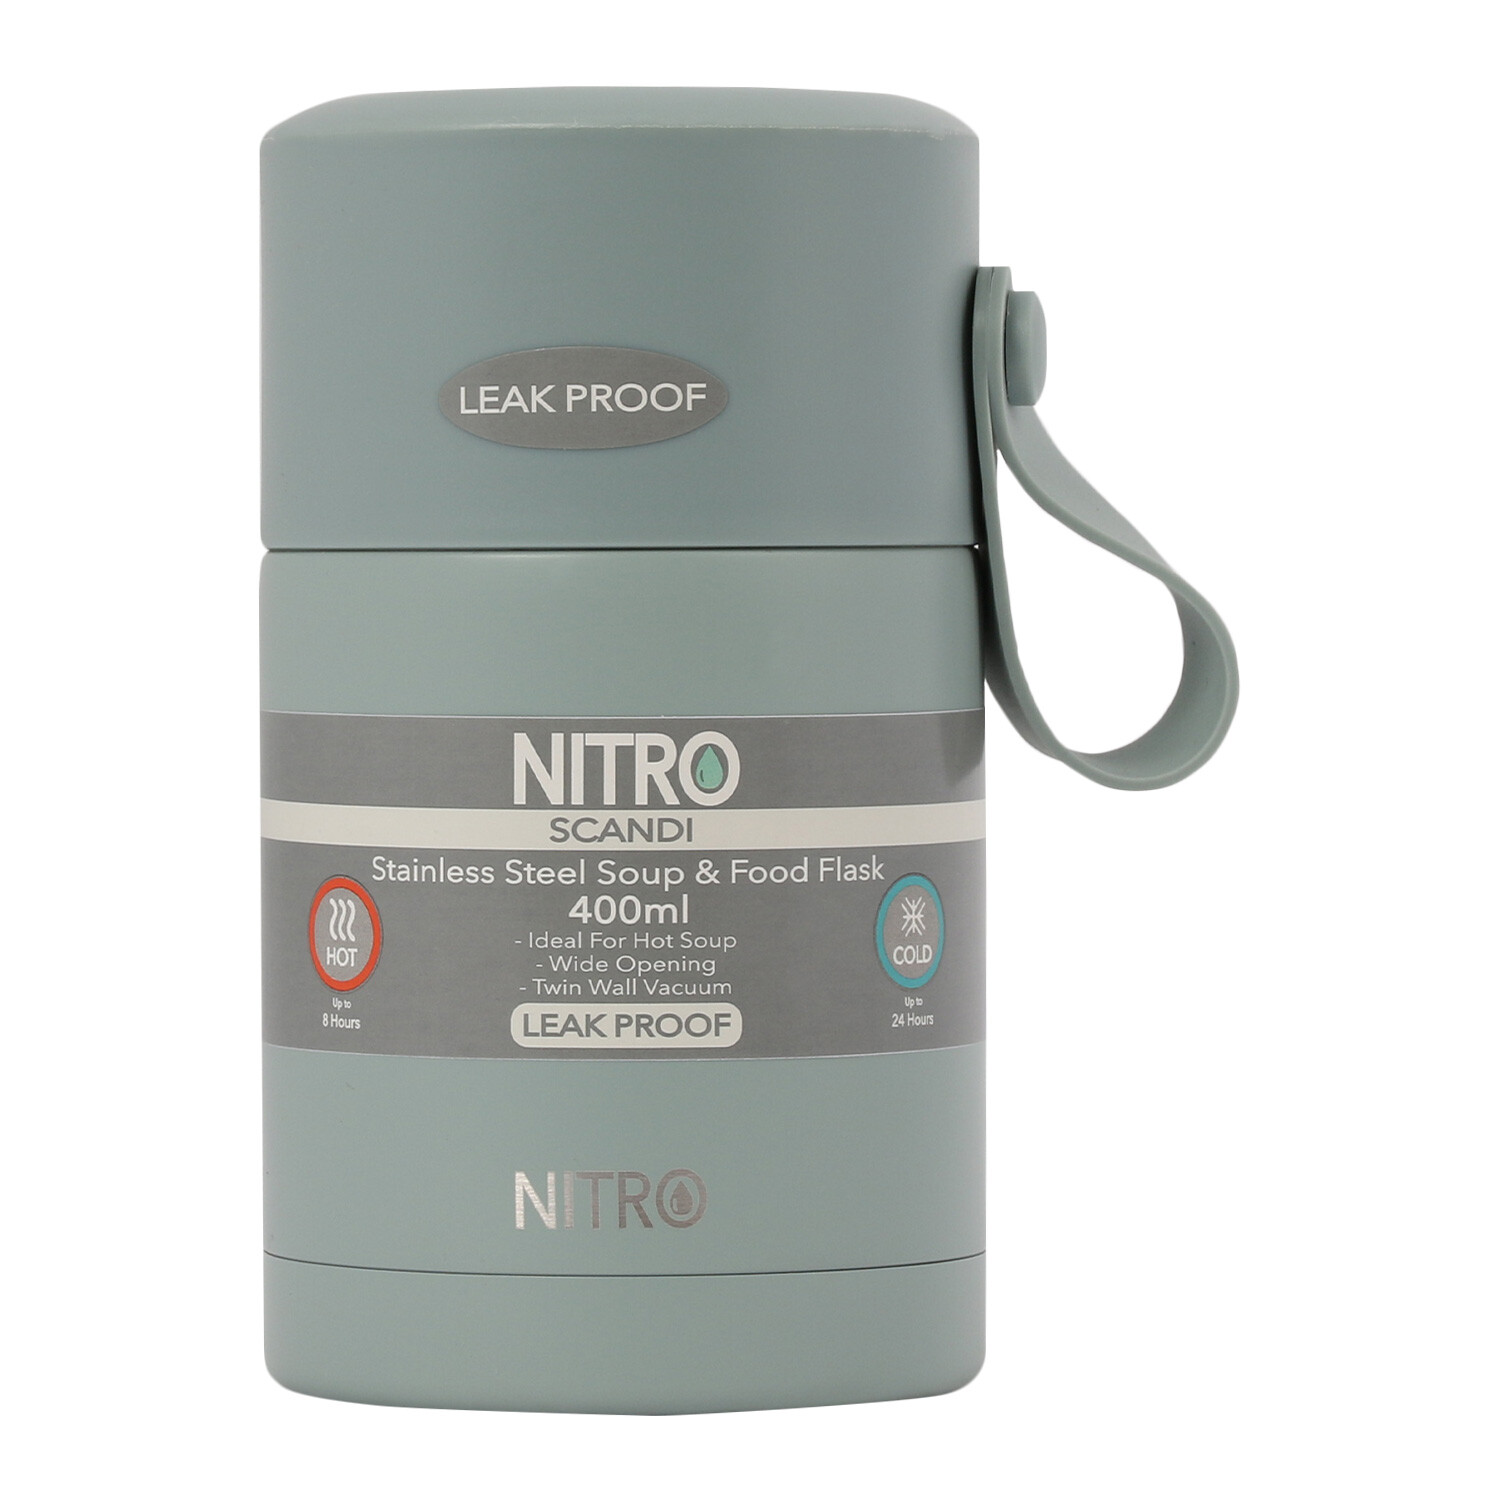 Nitro Scandi 400ml Stainless Steel Soup and Food Flask Image 3